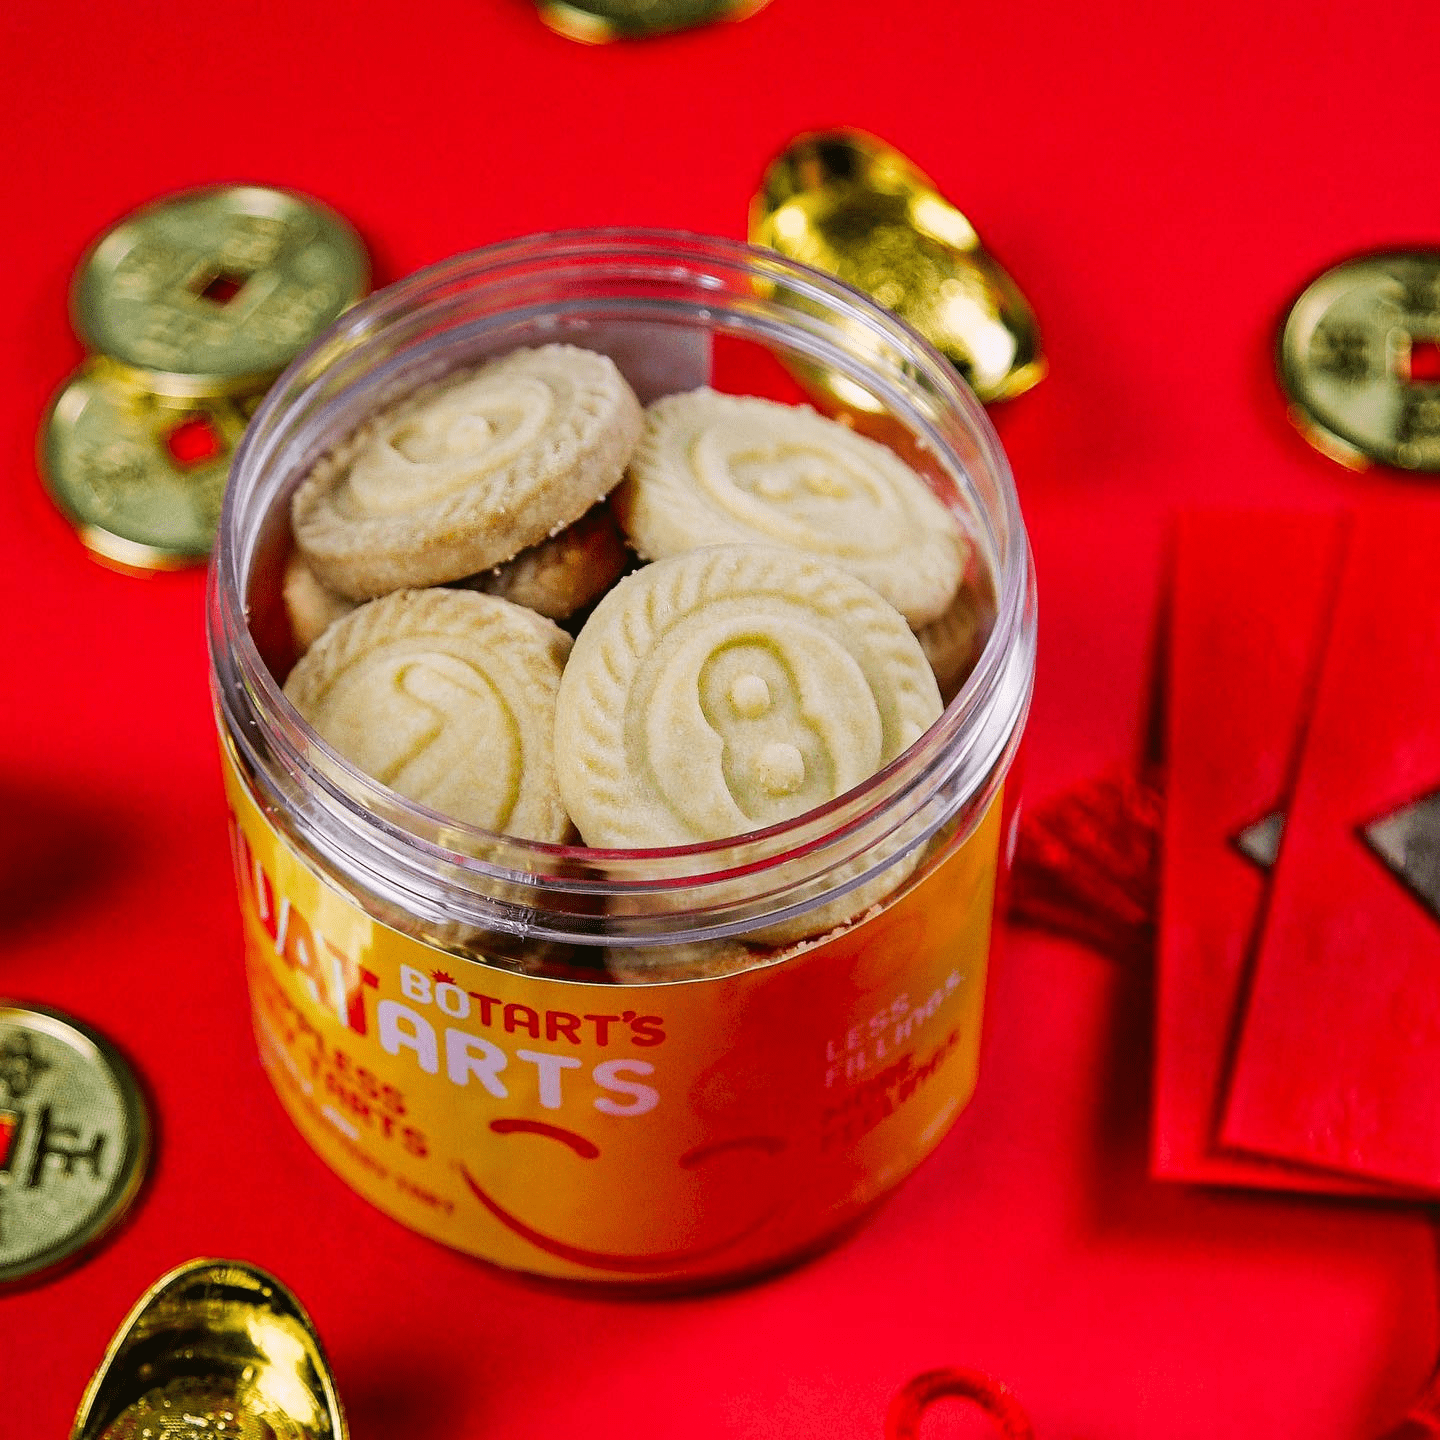 Online Bakeries To Get Unique Homemade CNY Goodies - BoTart lucky numbers on tarts without filling